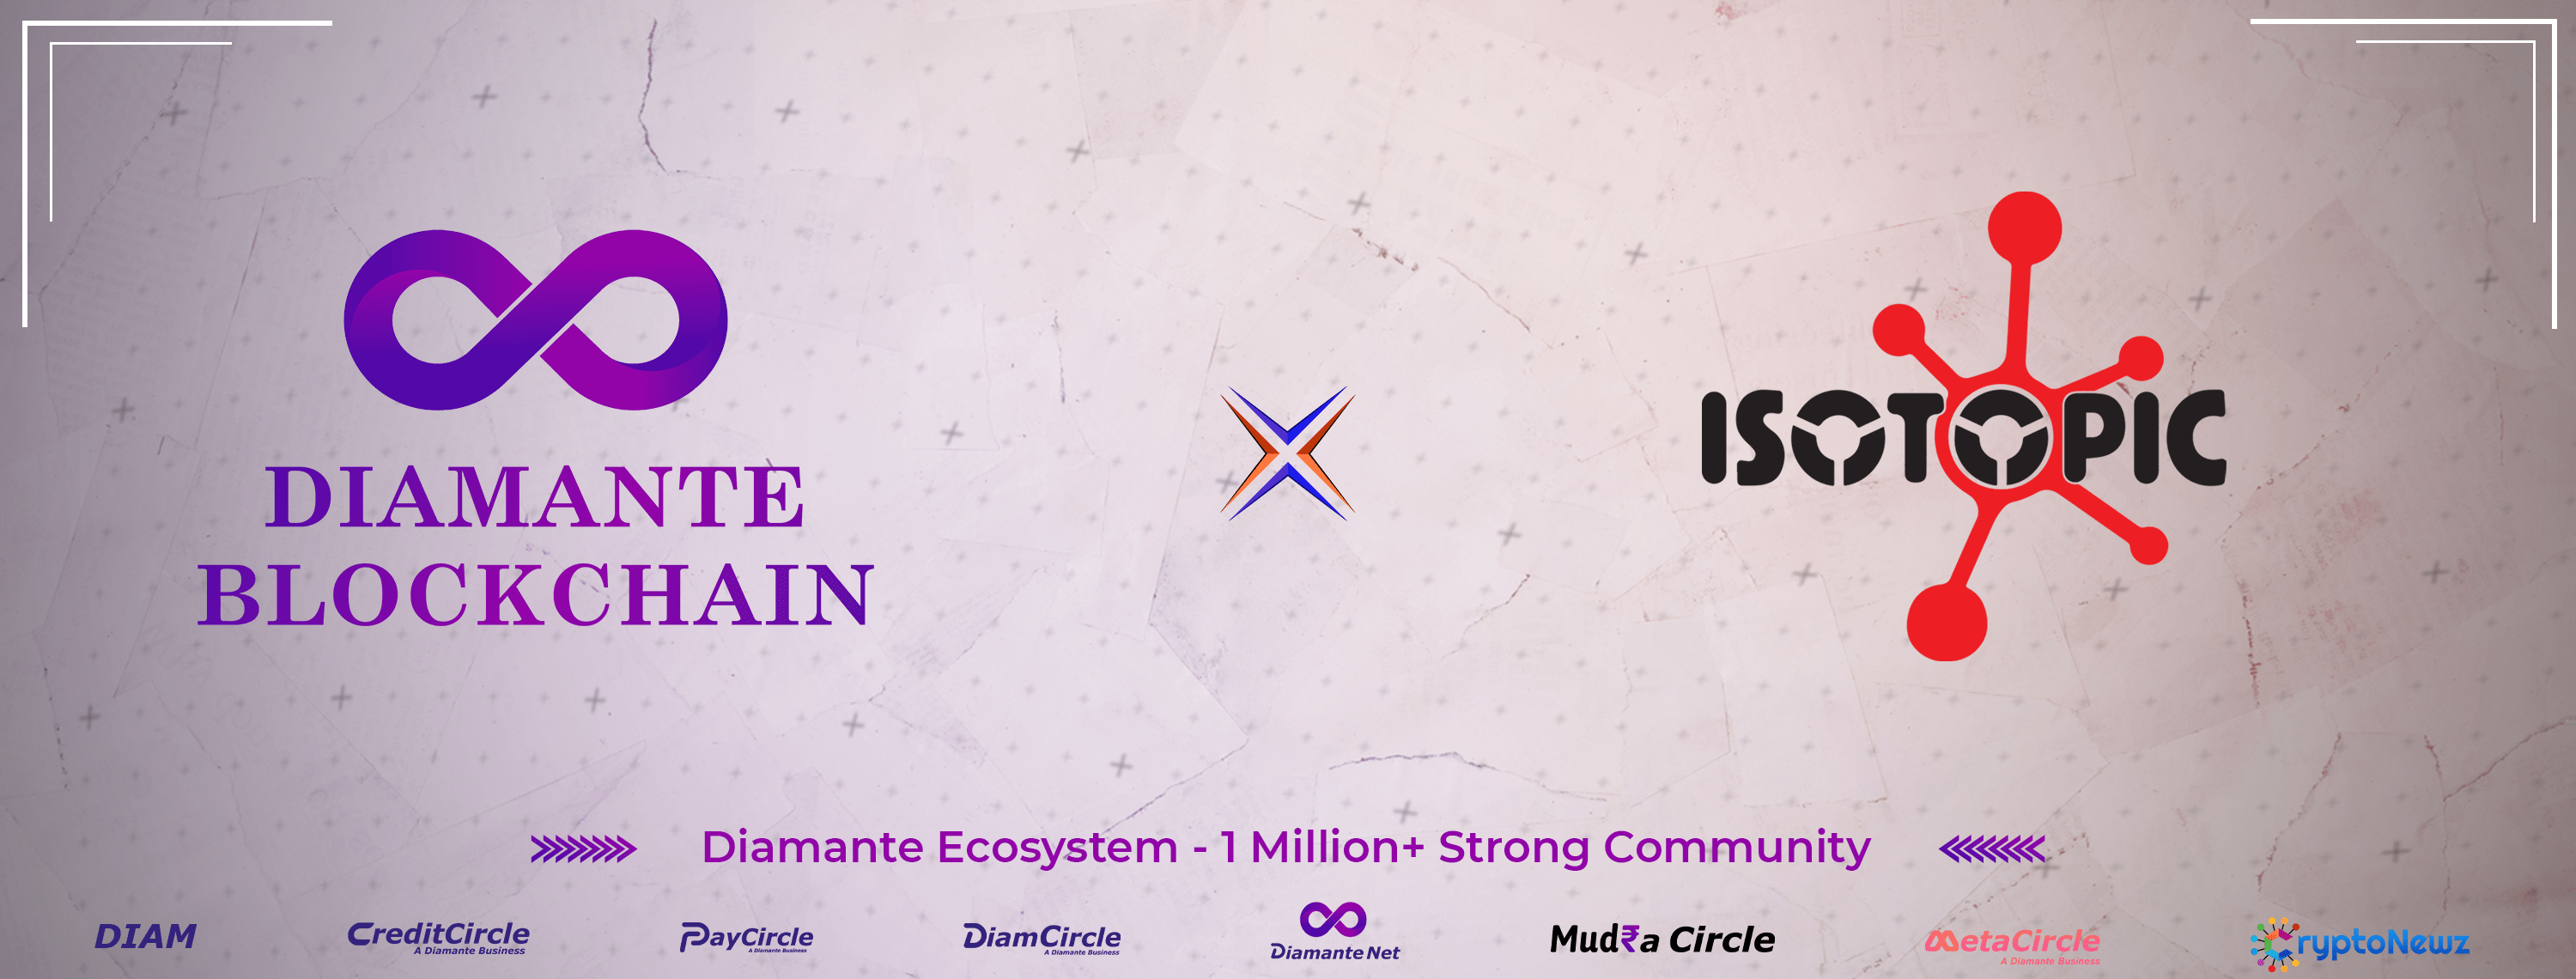 Wide banner showcasing the Diamante Blockchain ecosystem with a 1 million+ strong community. The image features the Diamante logo in purple, accompanied by logos of its associated businesses including CreditCircle, PayCircle, DiamCircle, DiamanteNet, Isotopic, and CryptoNewz, all set against a subtle background of interconnected lines and nodes, symbolizing network connections.